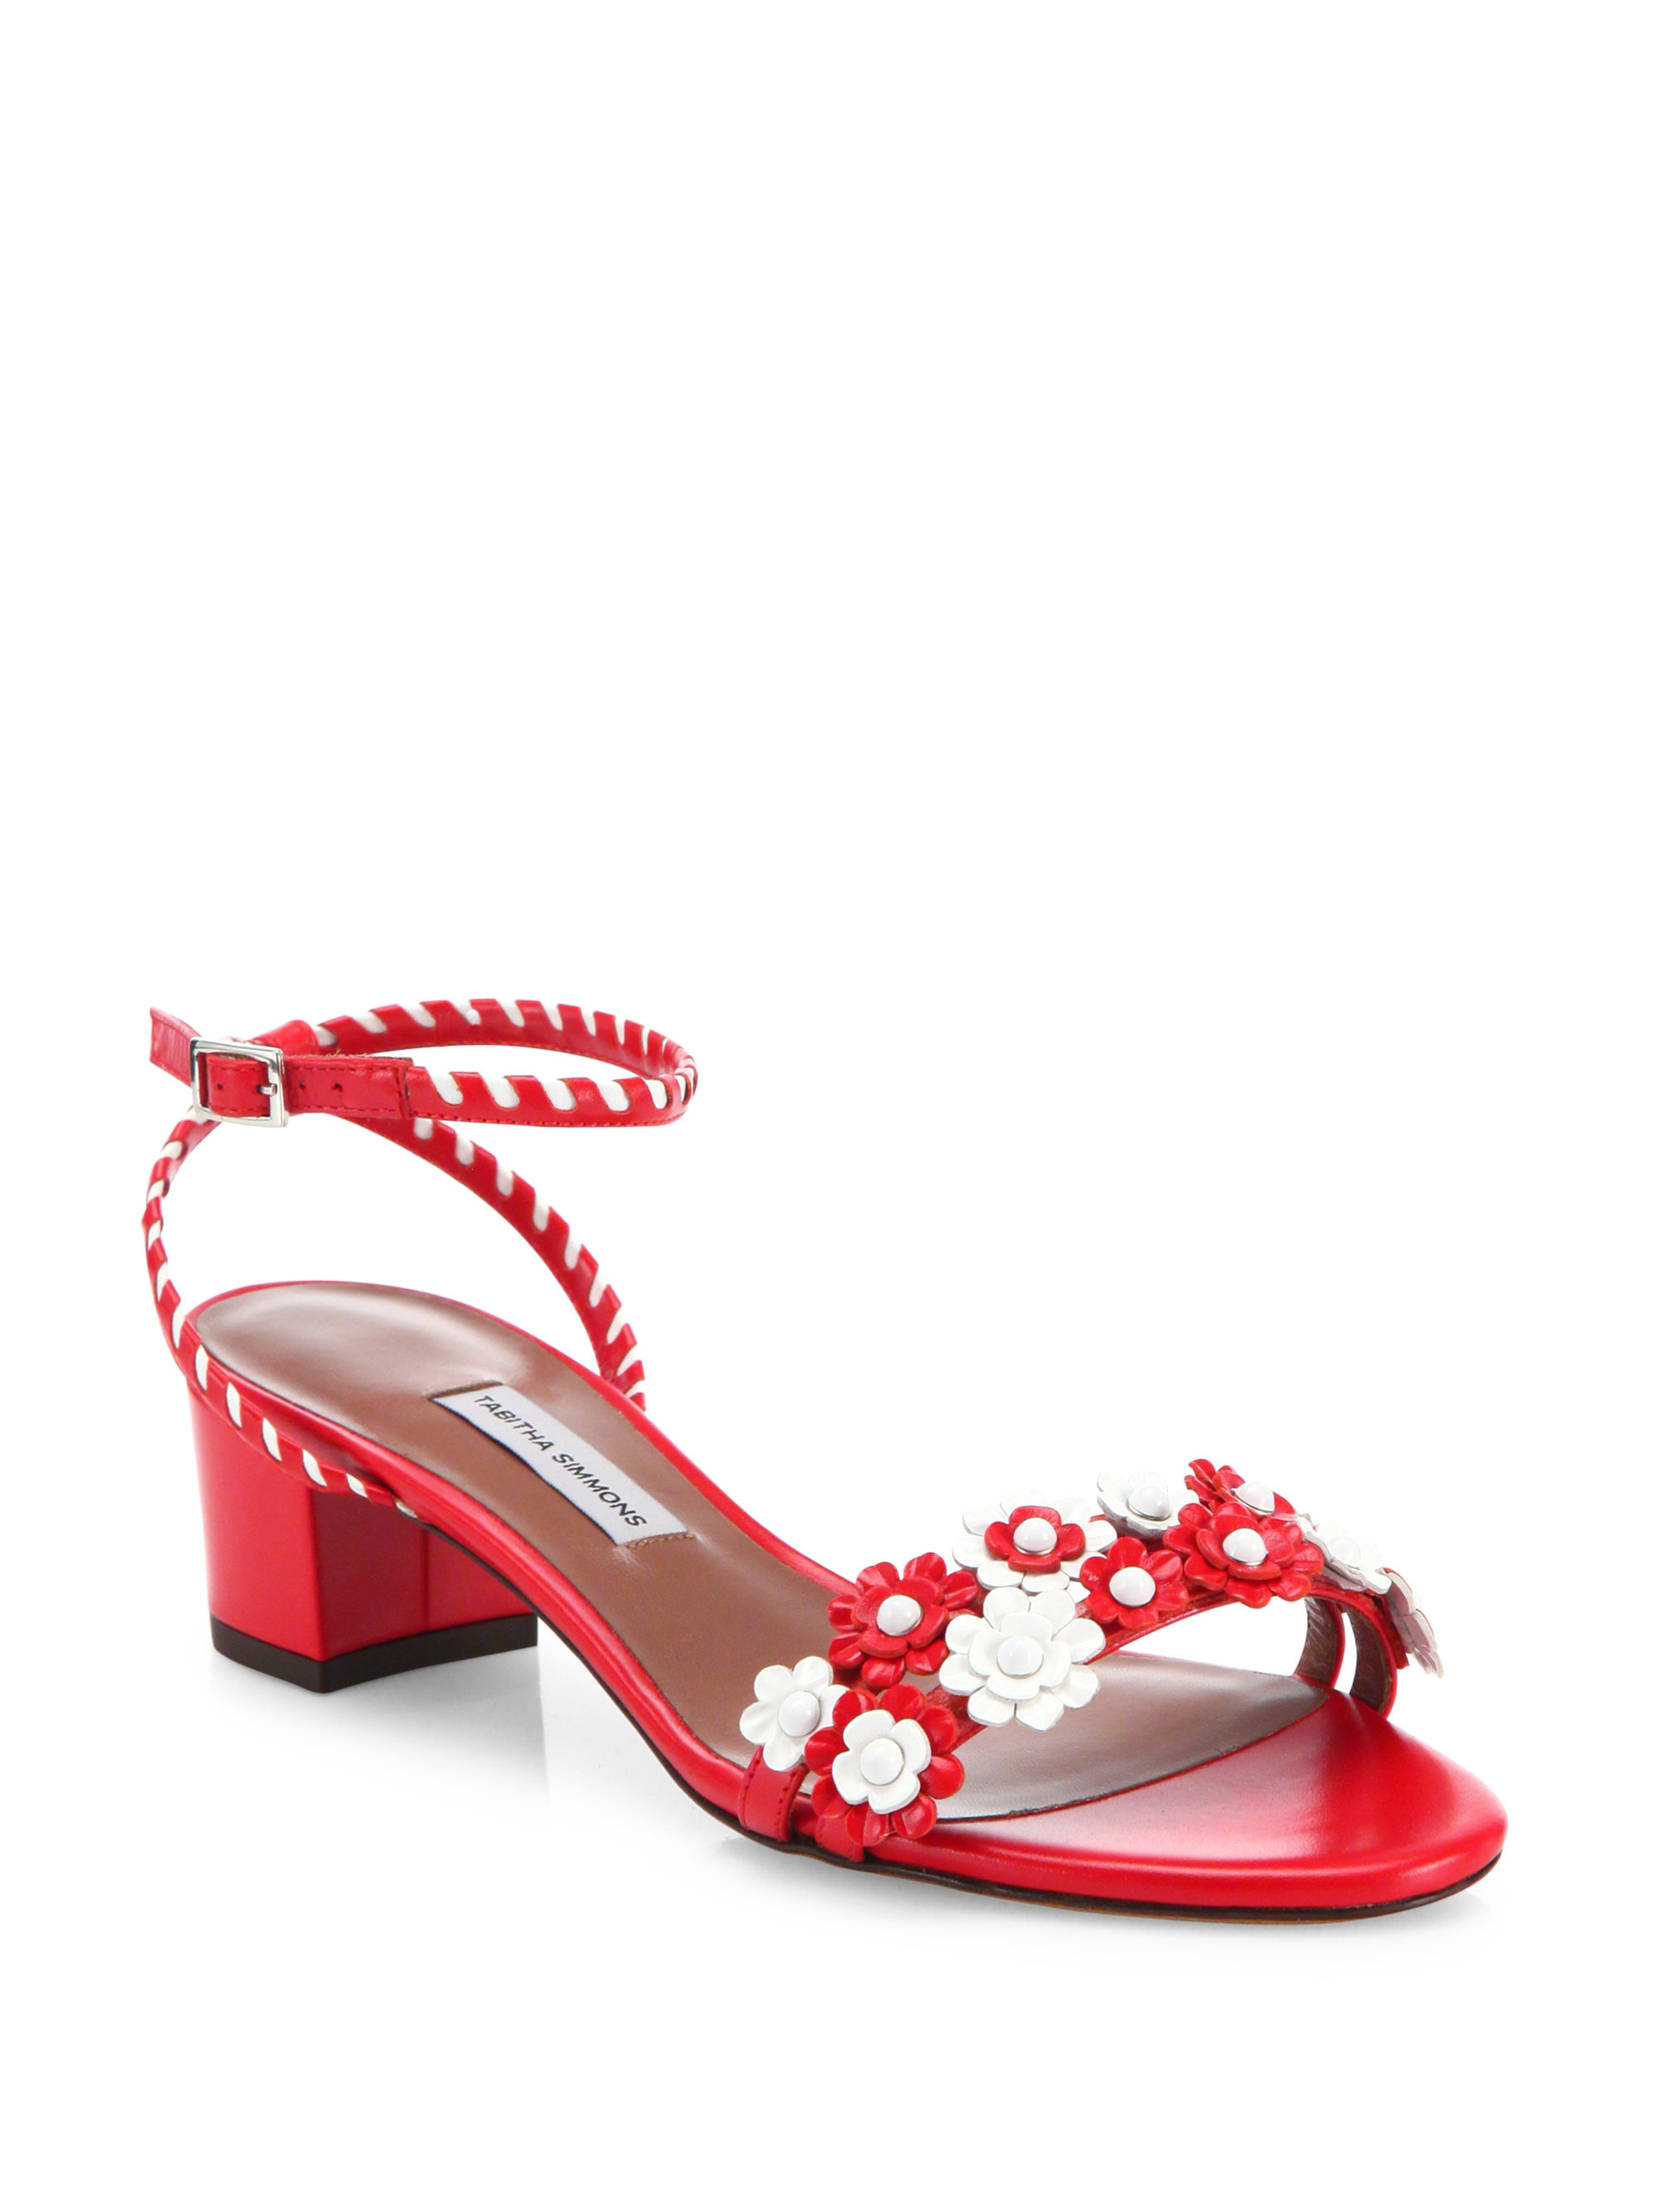 Lyst - Tabitha Simmons Floral Leather Block-heel Sandals in Red